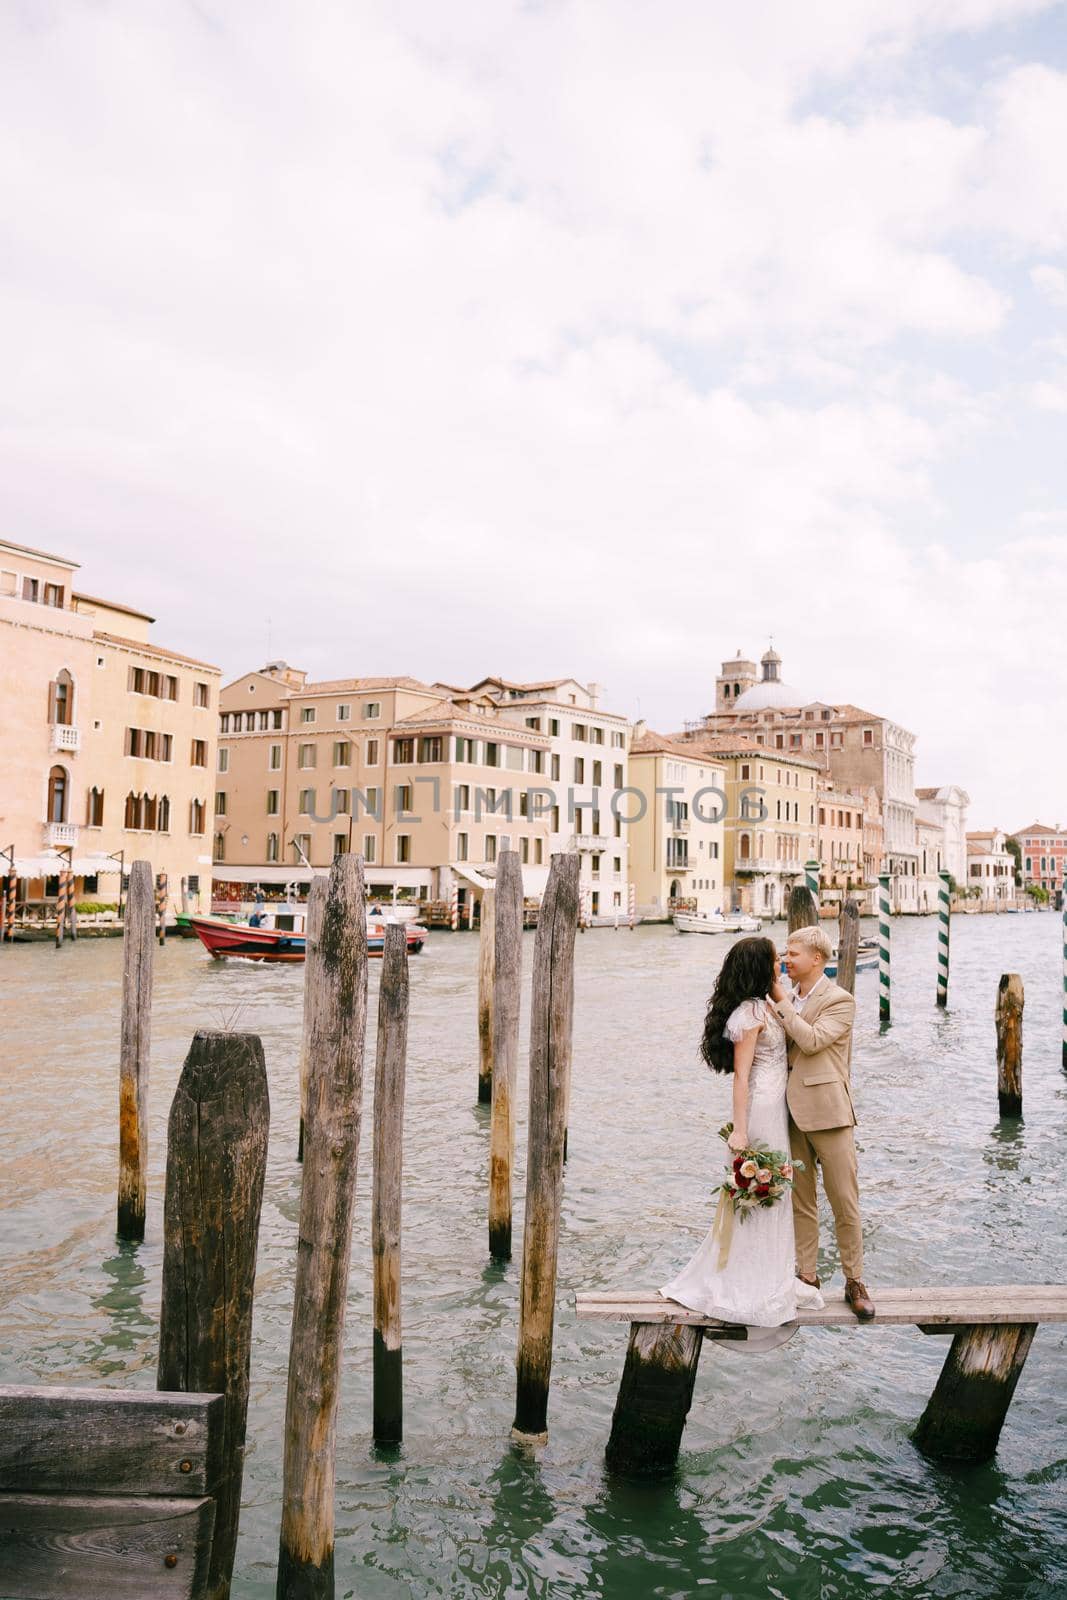 The bride and groom stand on a wooden dock for boats and gondolas, near striped green and white mooring poles, against the facades of the Grand Canal buildings.